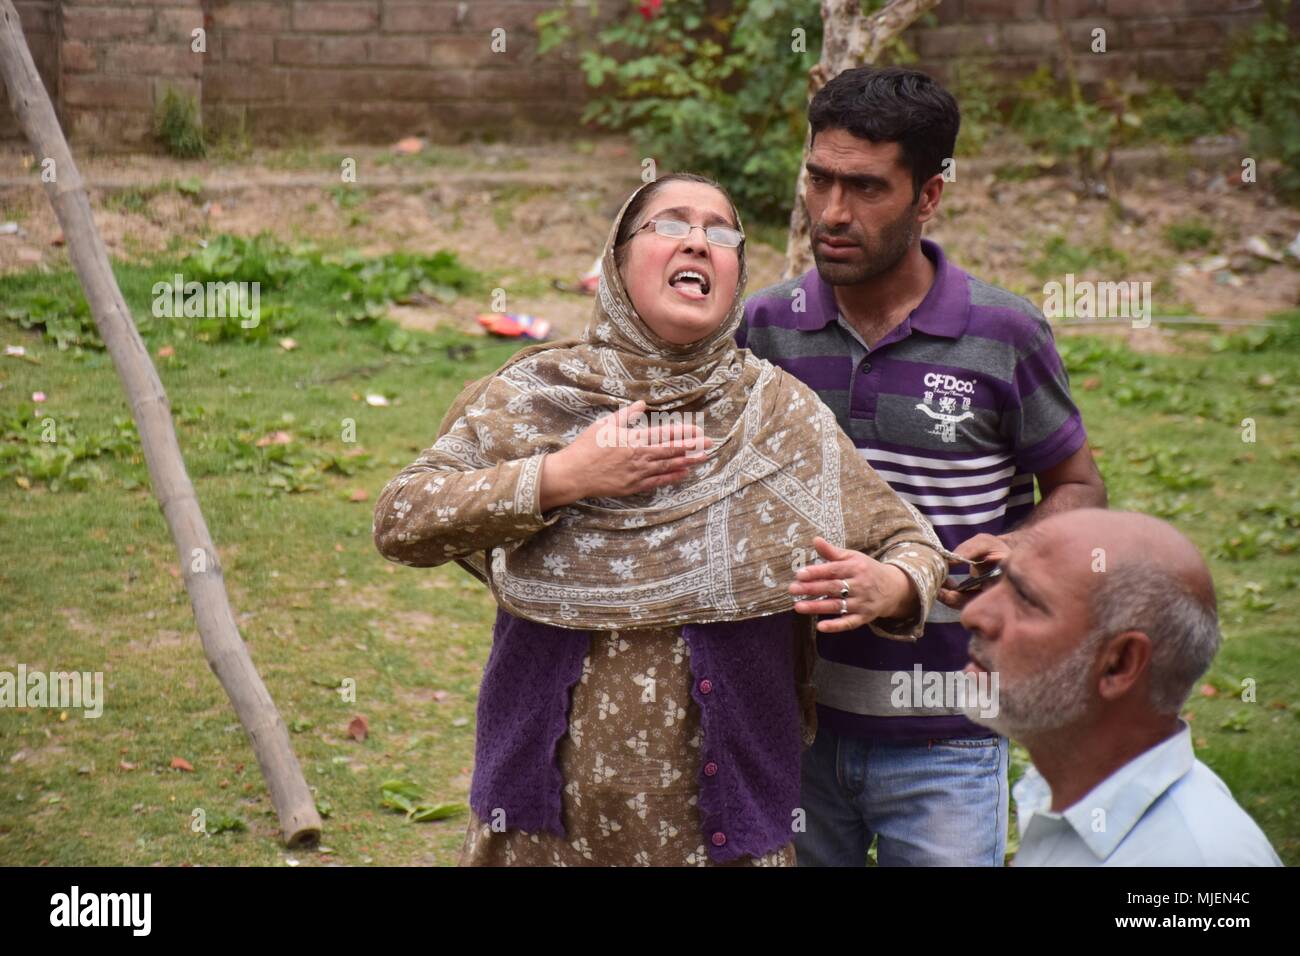 May 5, 2018 - Srinagar, Jammu & Kashmir, India - Women mourns near the Encounter site in Srinagar.4 Killed and several injured in an encounter between Indian forces and militants at chatabal area of Srinagar summer capital of Indian Kashmir on Saturday. Three militants were killed during a brief shootout after government forces laid seige around densely populated chatabal area of Srinagar. A young man also died after he was hit by the armoured vehicle during the clashes between the residents and police force as residents tried to help the Militants in escape. (Credit Image: © Abbas Idrees/SOP Stock Photo